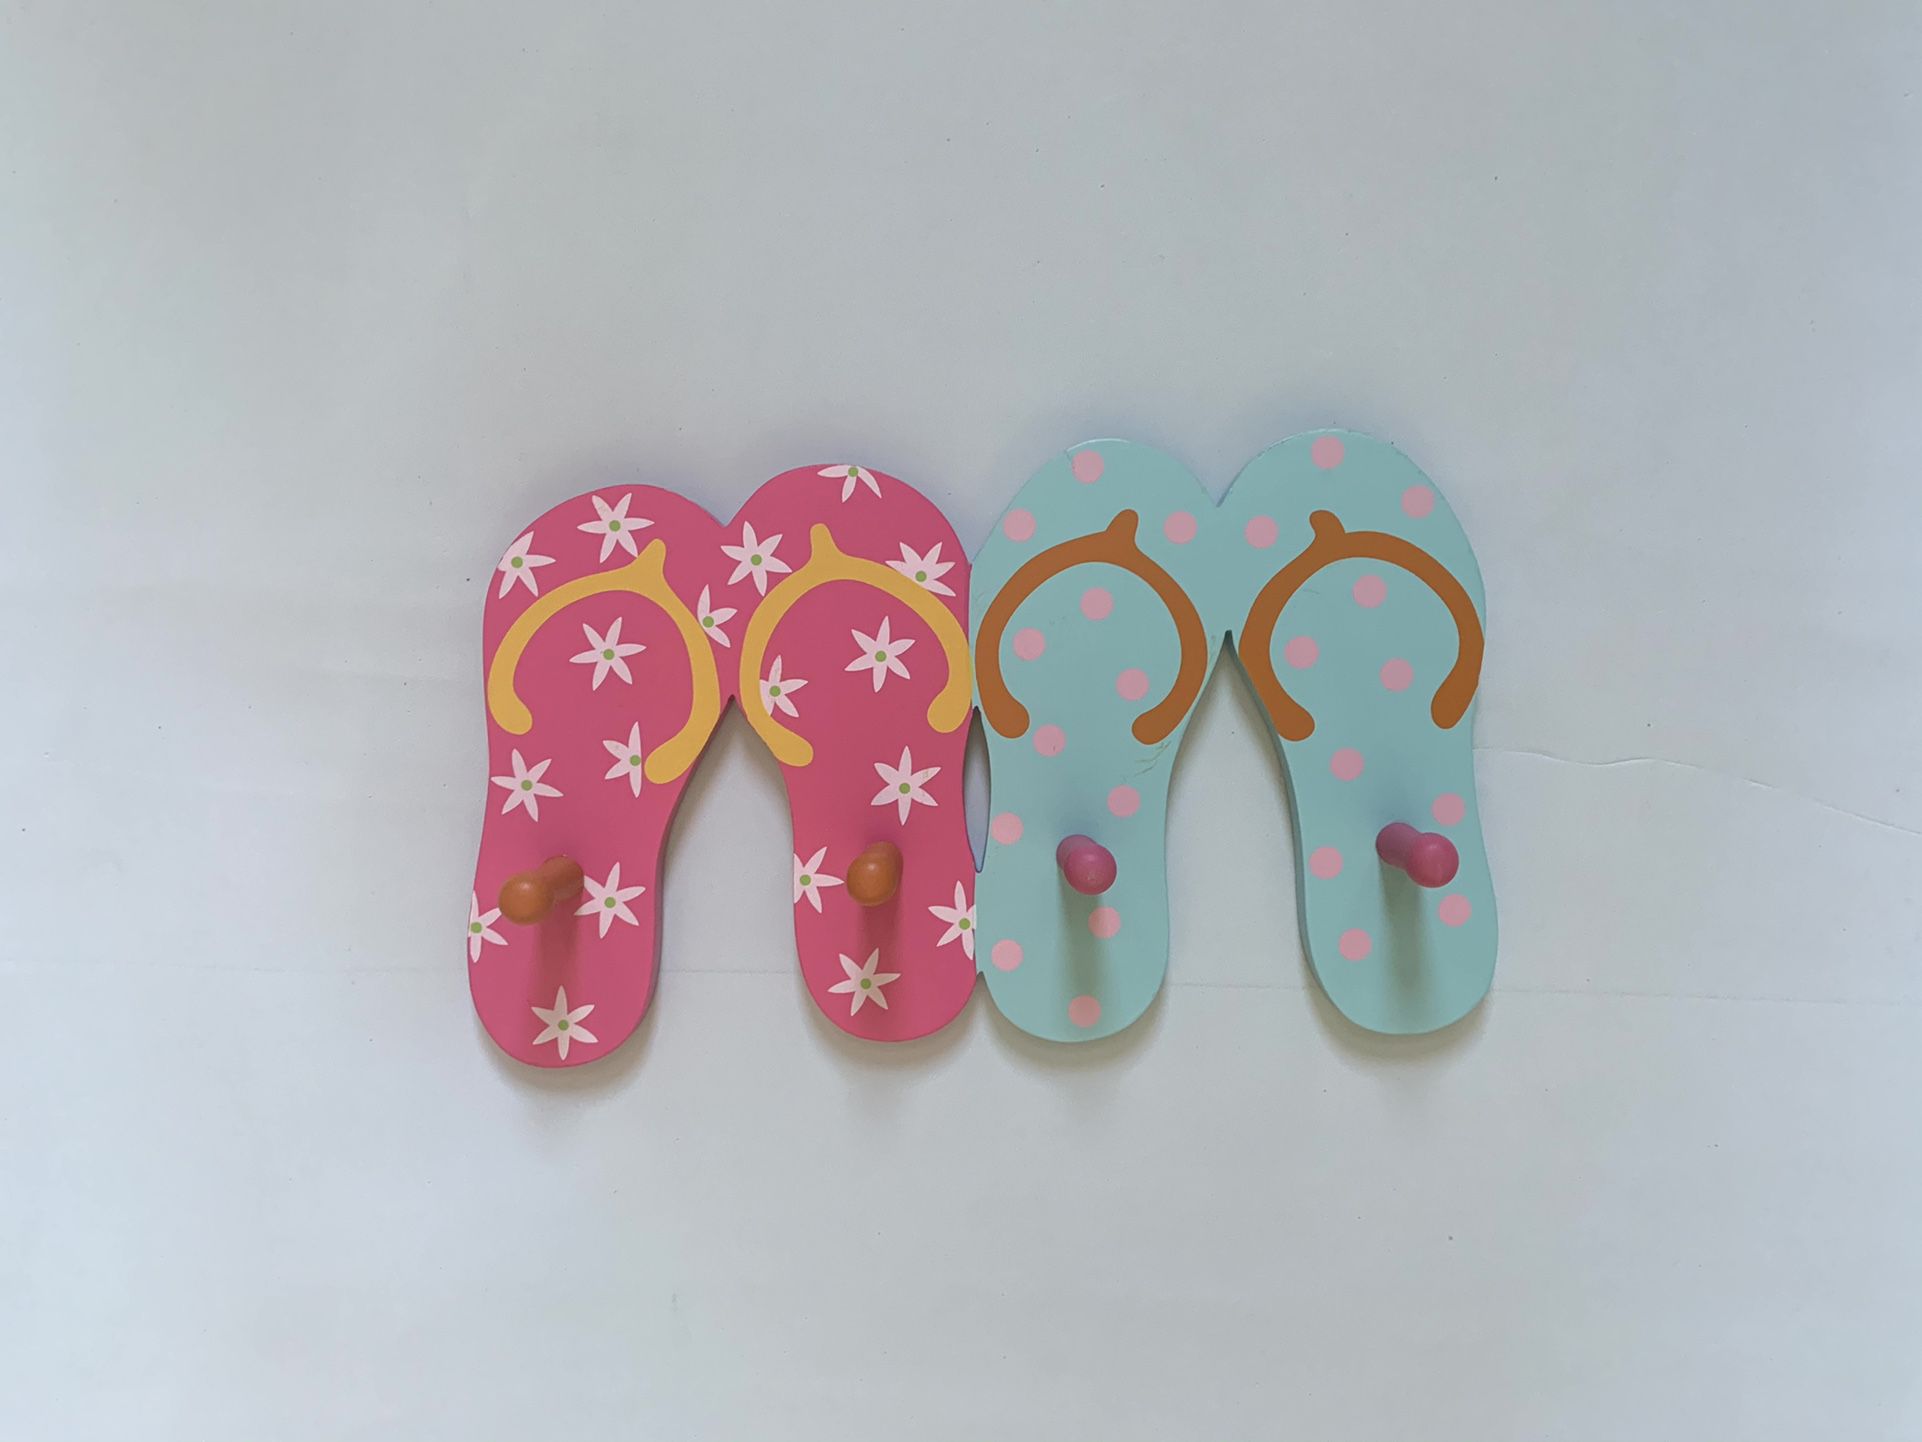 Pink And Blue Flip Flop Wood Wall Mount 4 Hook Rack For Towels, Hats, Purses